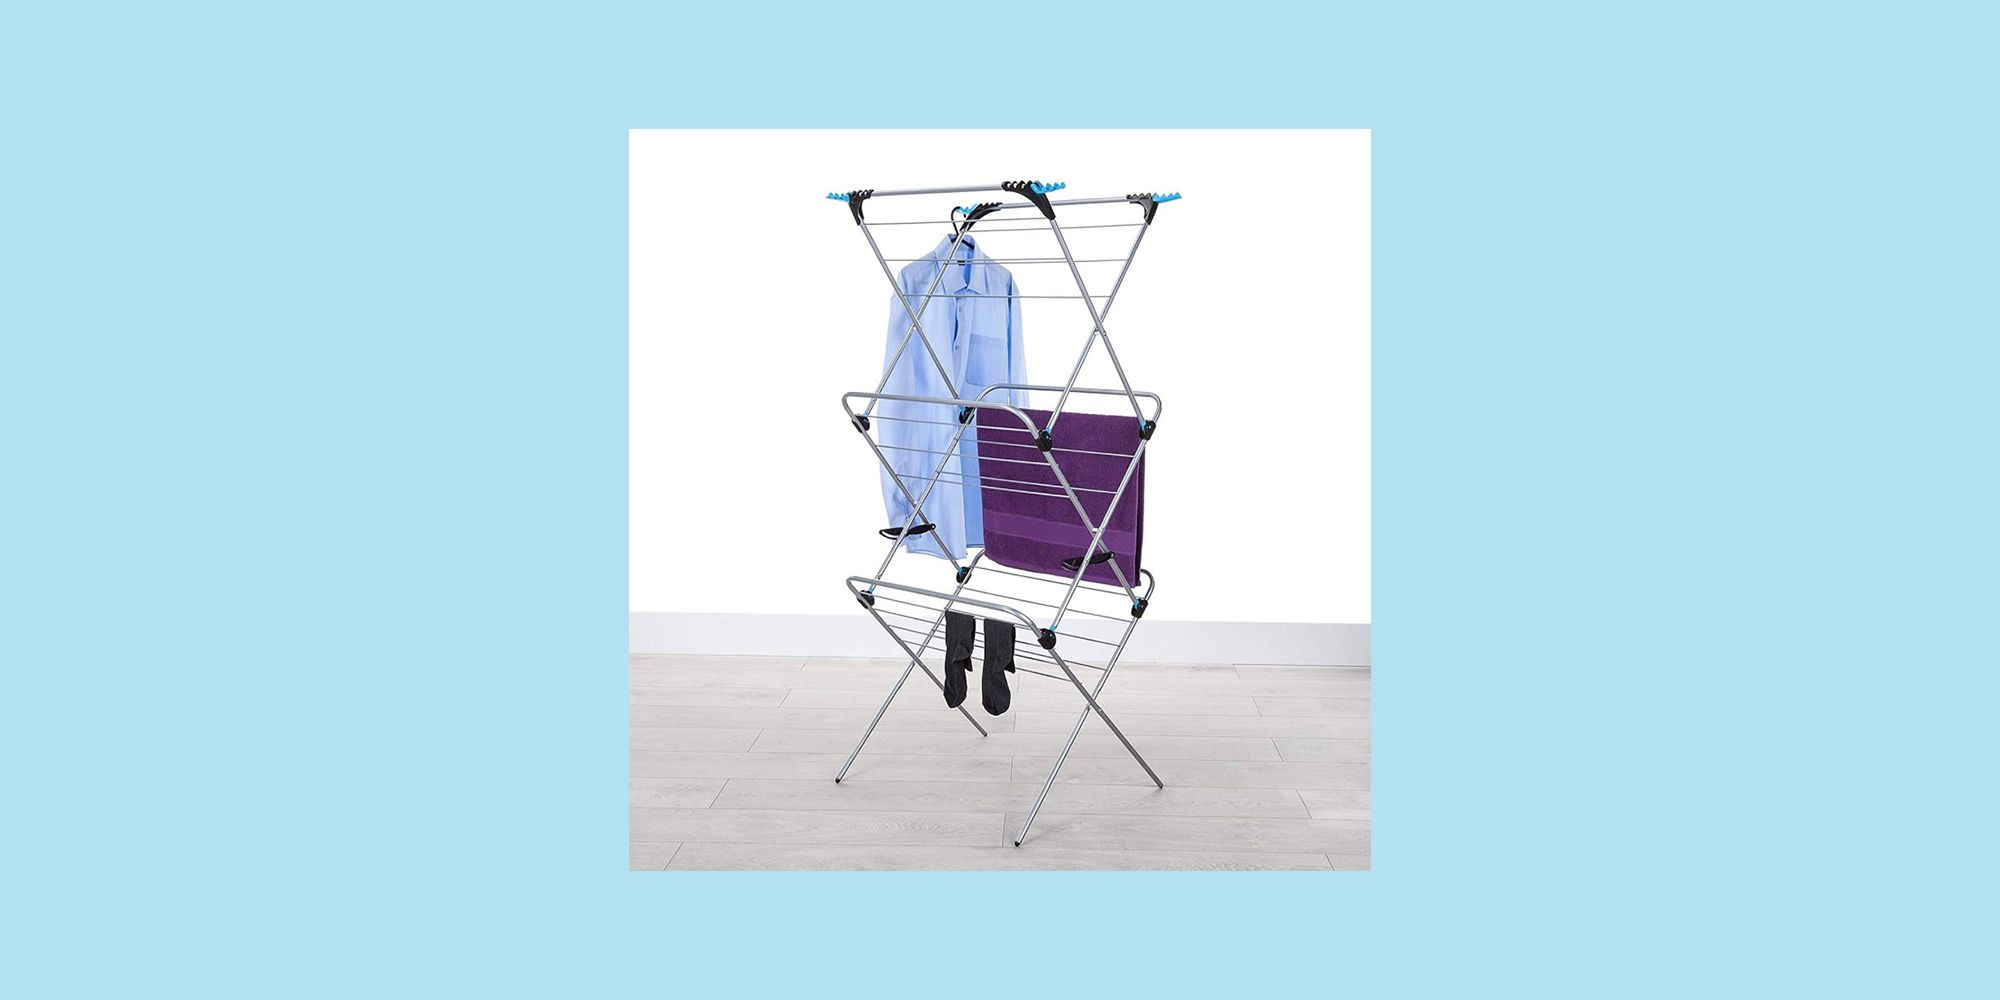 ELECTRIC CLOTHES AIRER DRYER INDOOR HORSE RACK LAUNDRY FOLDING WASHING DRY FOLD 